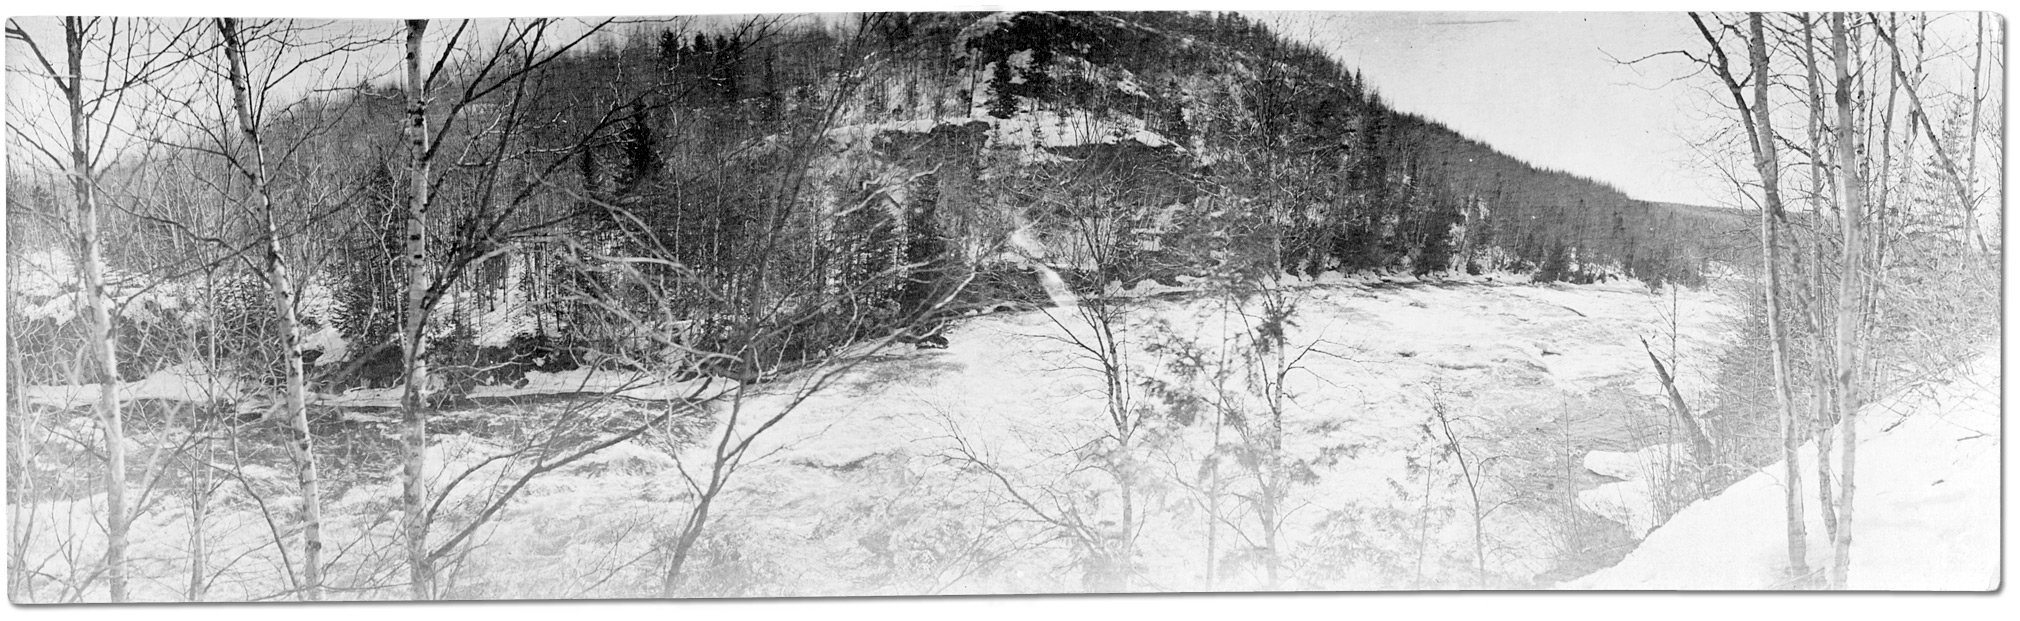 Photo: View of a hillside river, [ca. 1915]